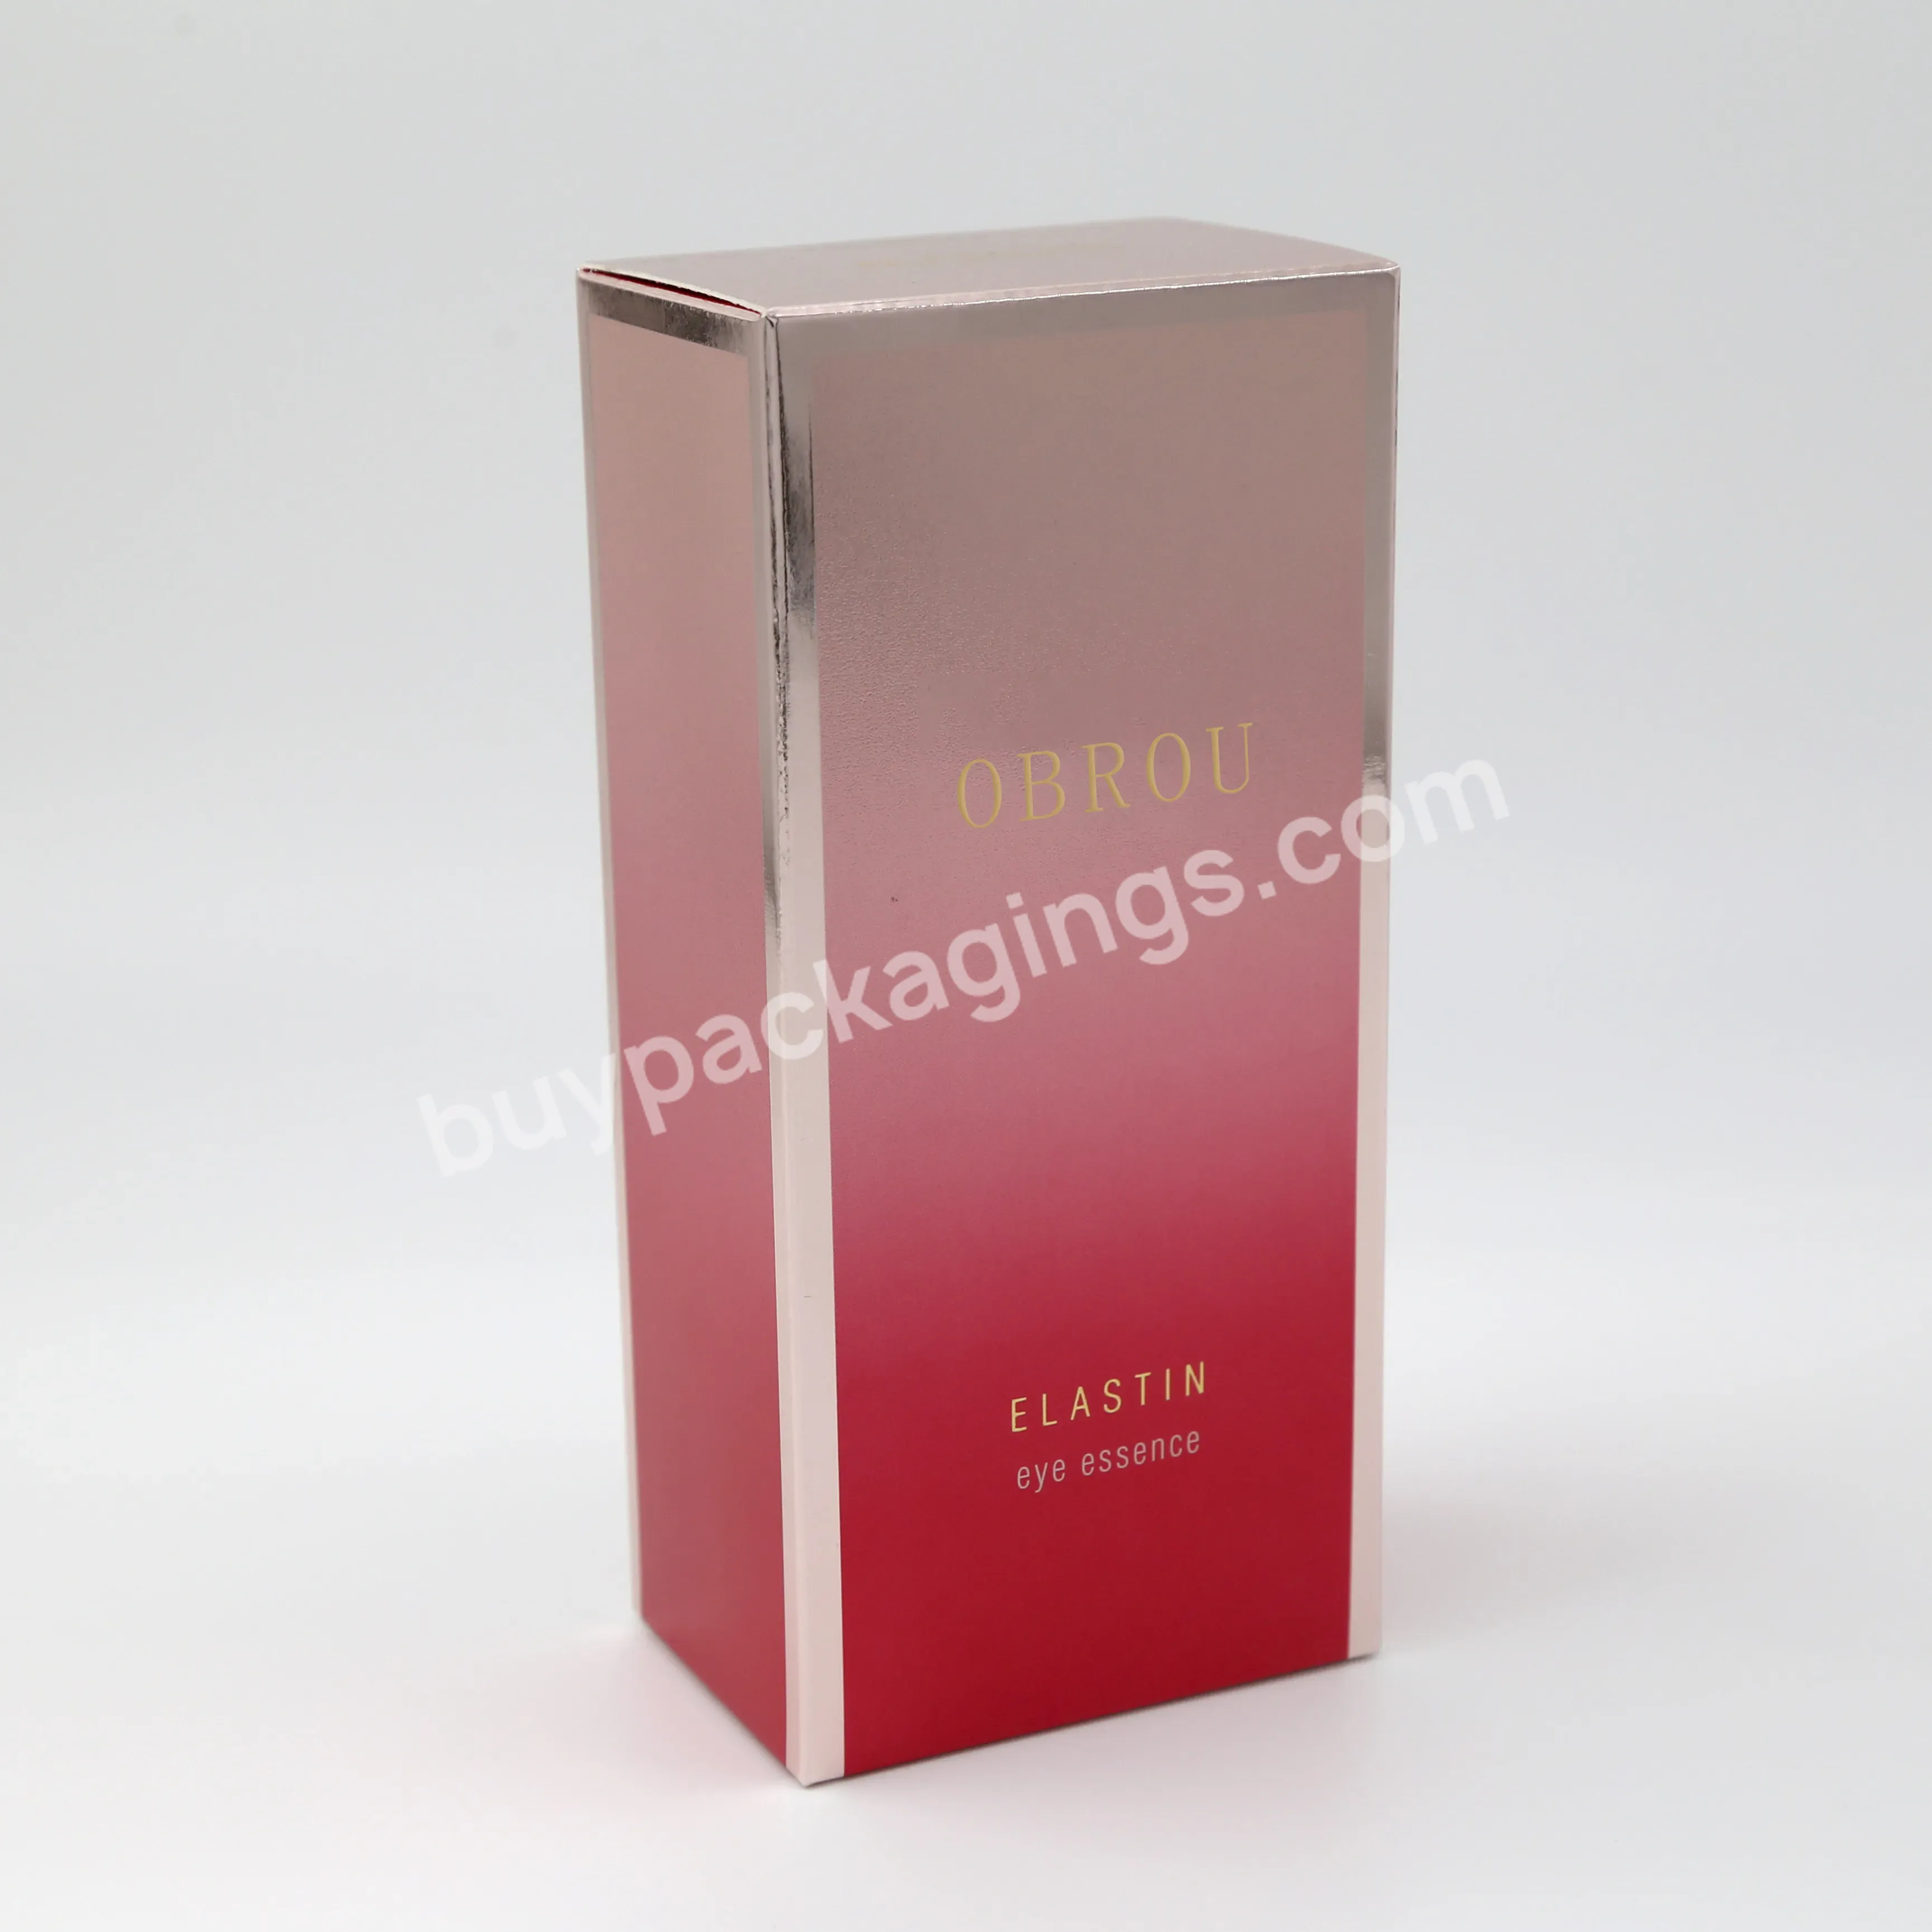 High Quality Luxury Cosmetic Packaging Paper Box Foldable Folding Box For Essential Oil Bottles